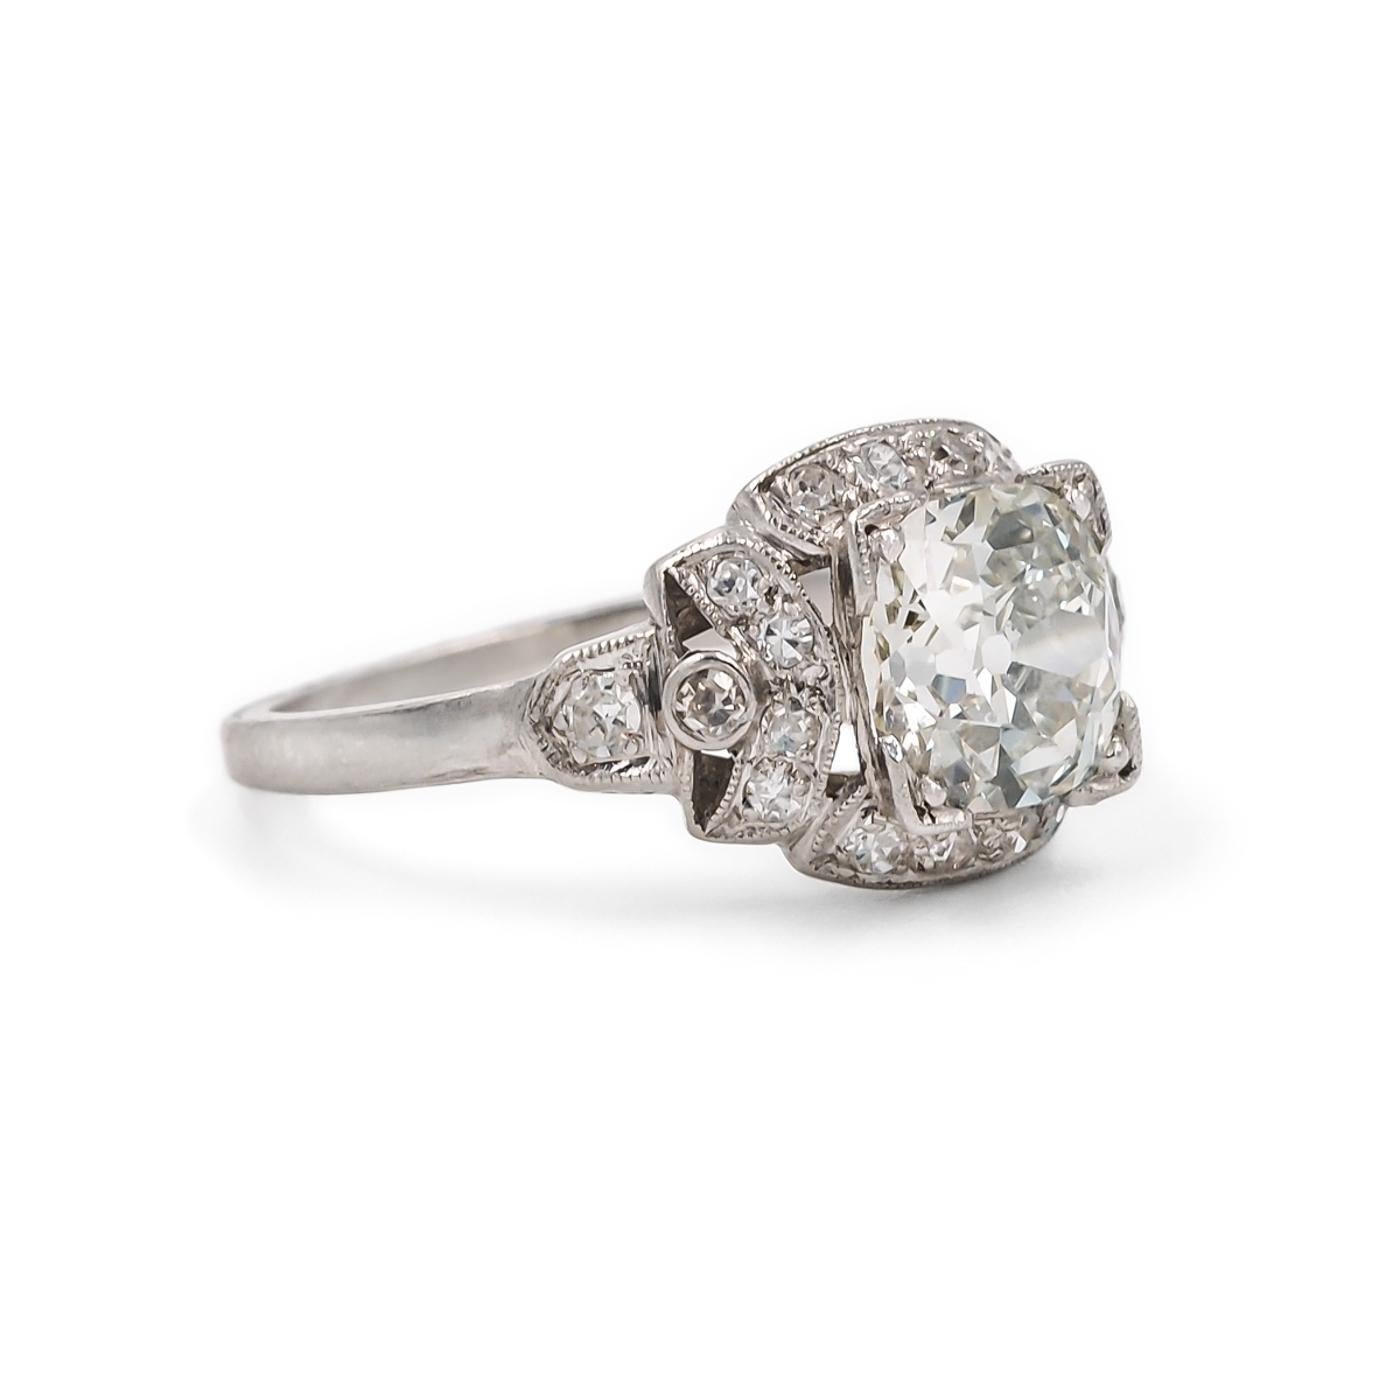 Art Deco era ring by Tiffany & Co. composed of platinum. Centering a 1.32 carat Old European Cut diamond. GIA certified F color/VVS2 clarity. Surrounded by 20 Round Single Cut diamond accent stones weighing approximately 0.26 carats in total.